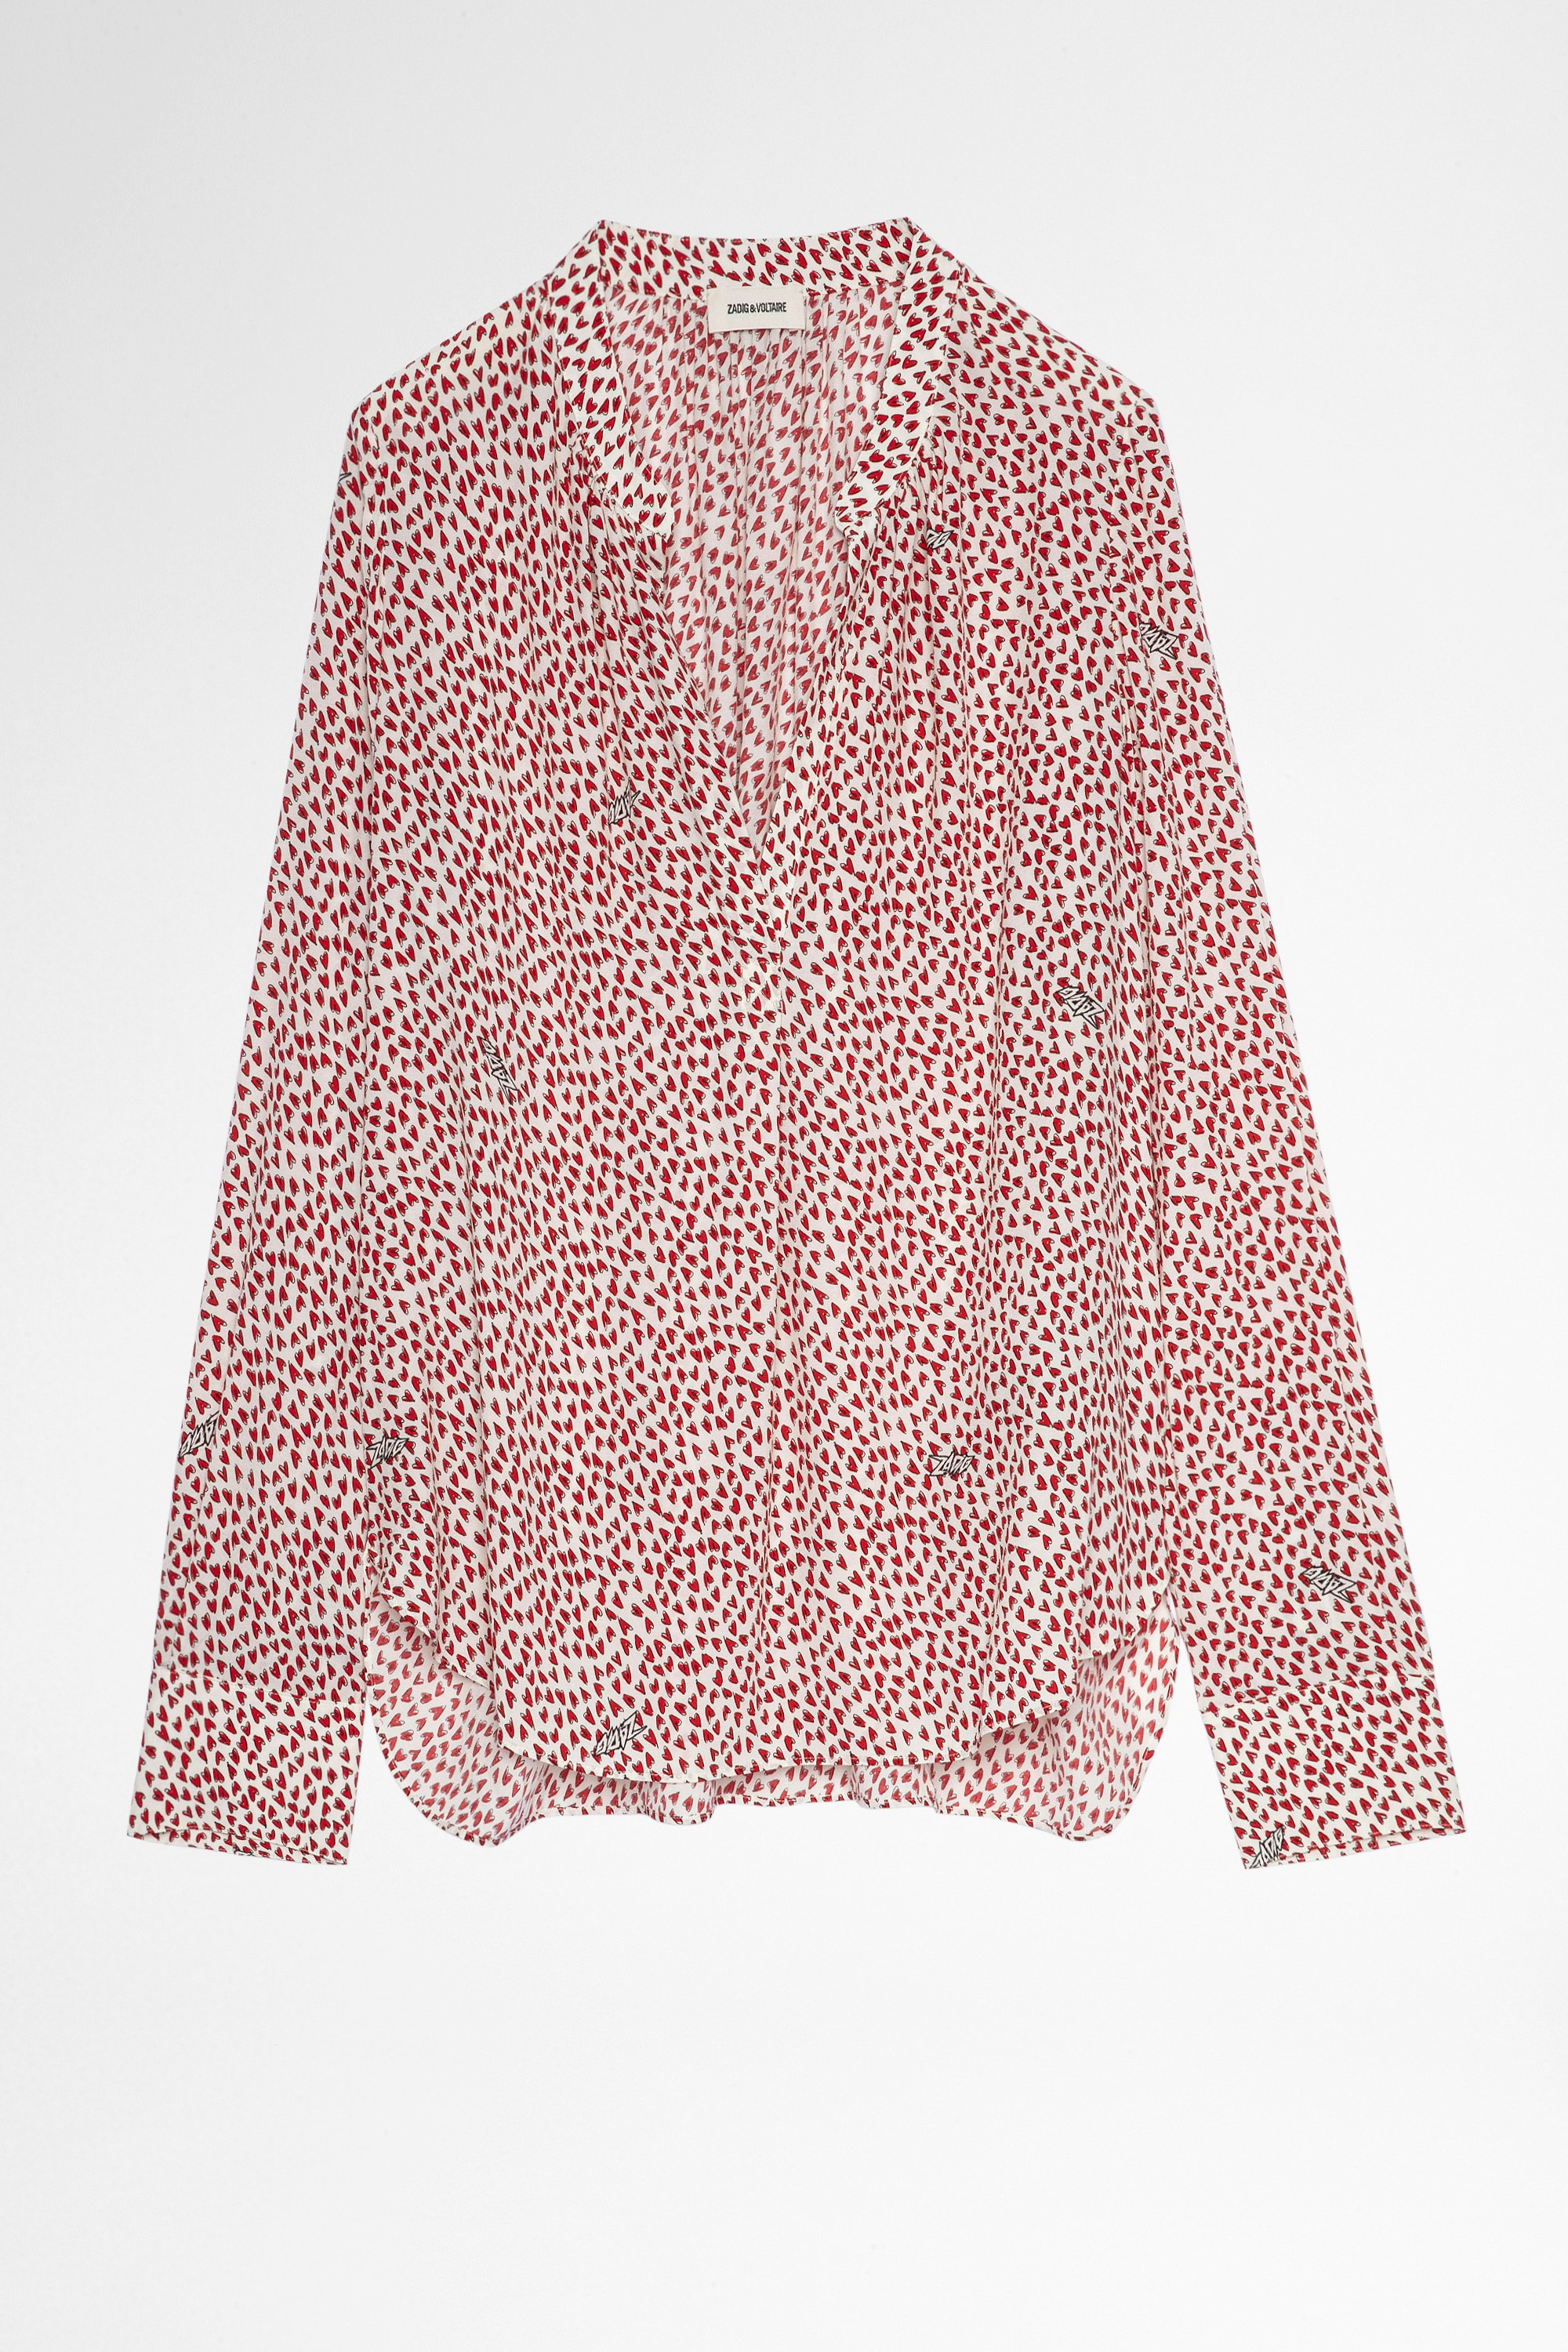 Tink ZV Crush シャツ Women's long-sleeved ecru shirt with heart print. Made with fibers from sustainably managed forests.